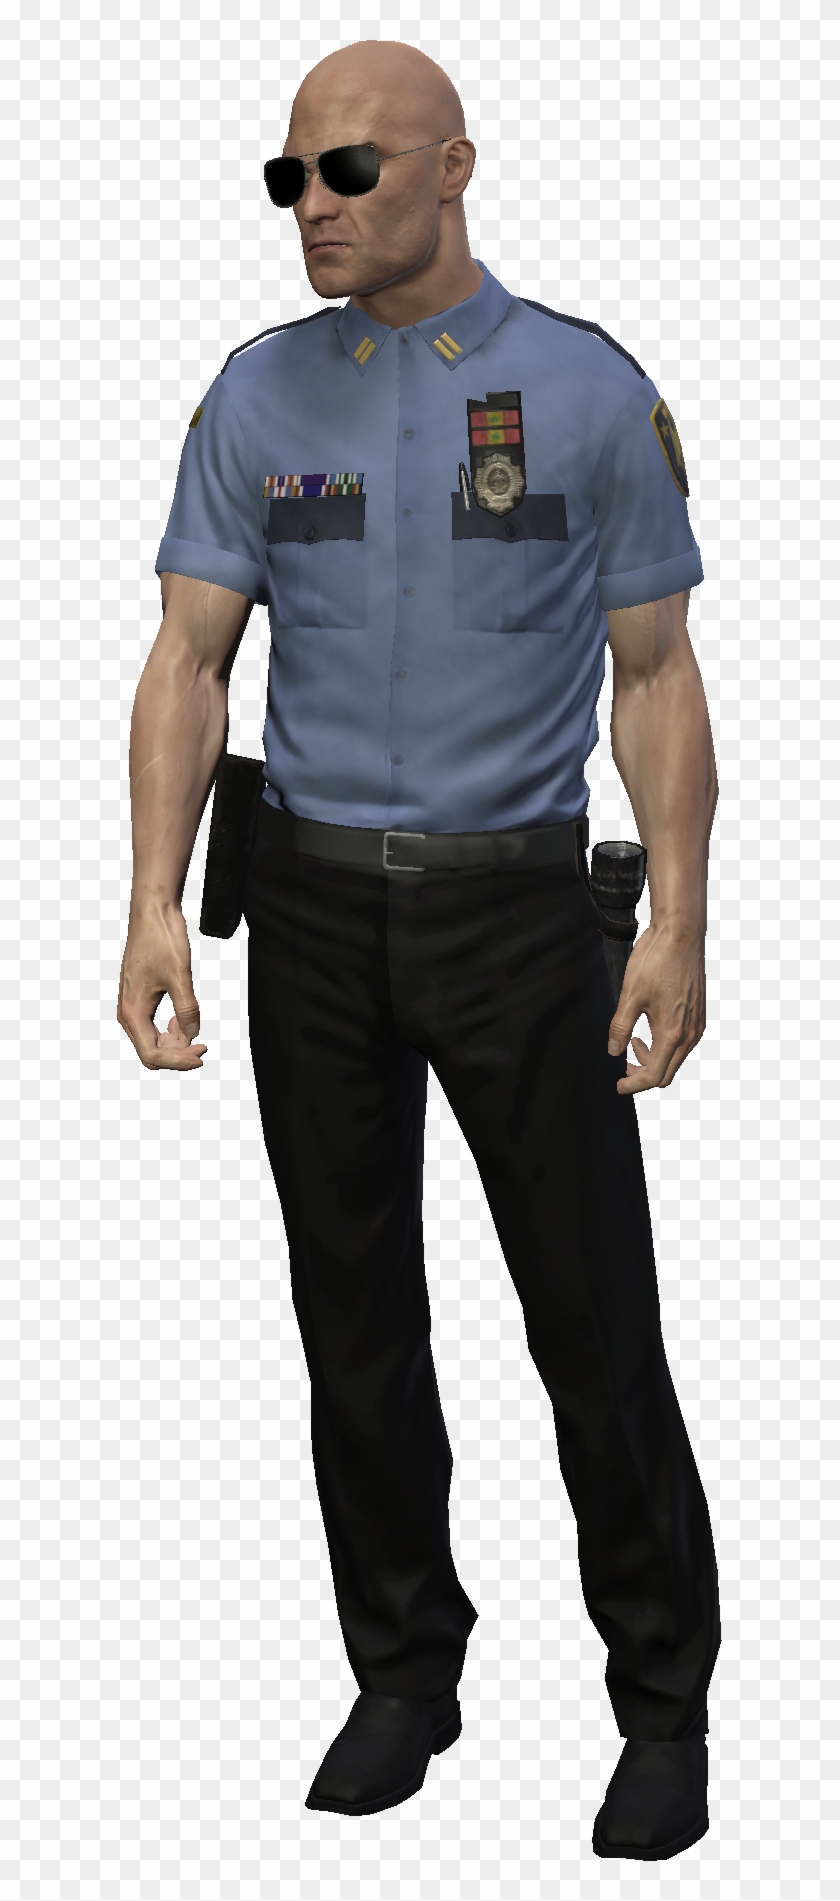 Court Security Guard - Security Guard Png Clipart #1107792